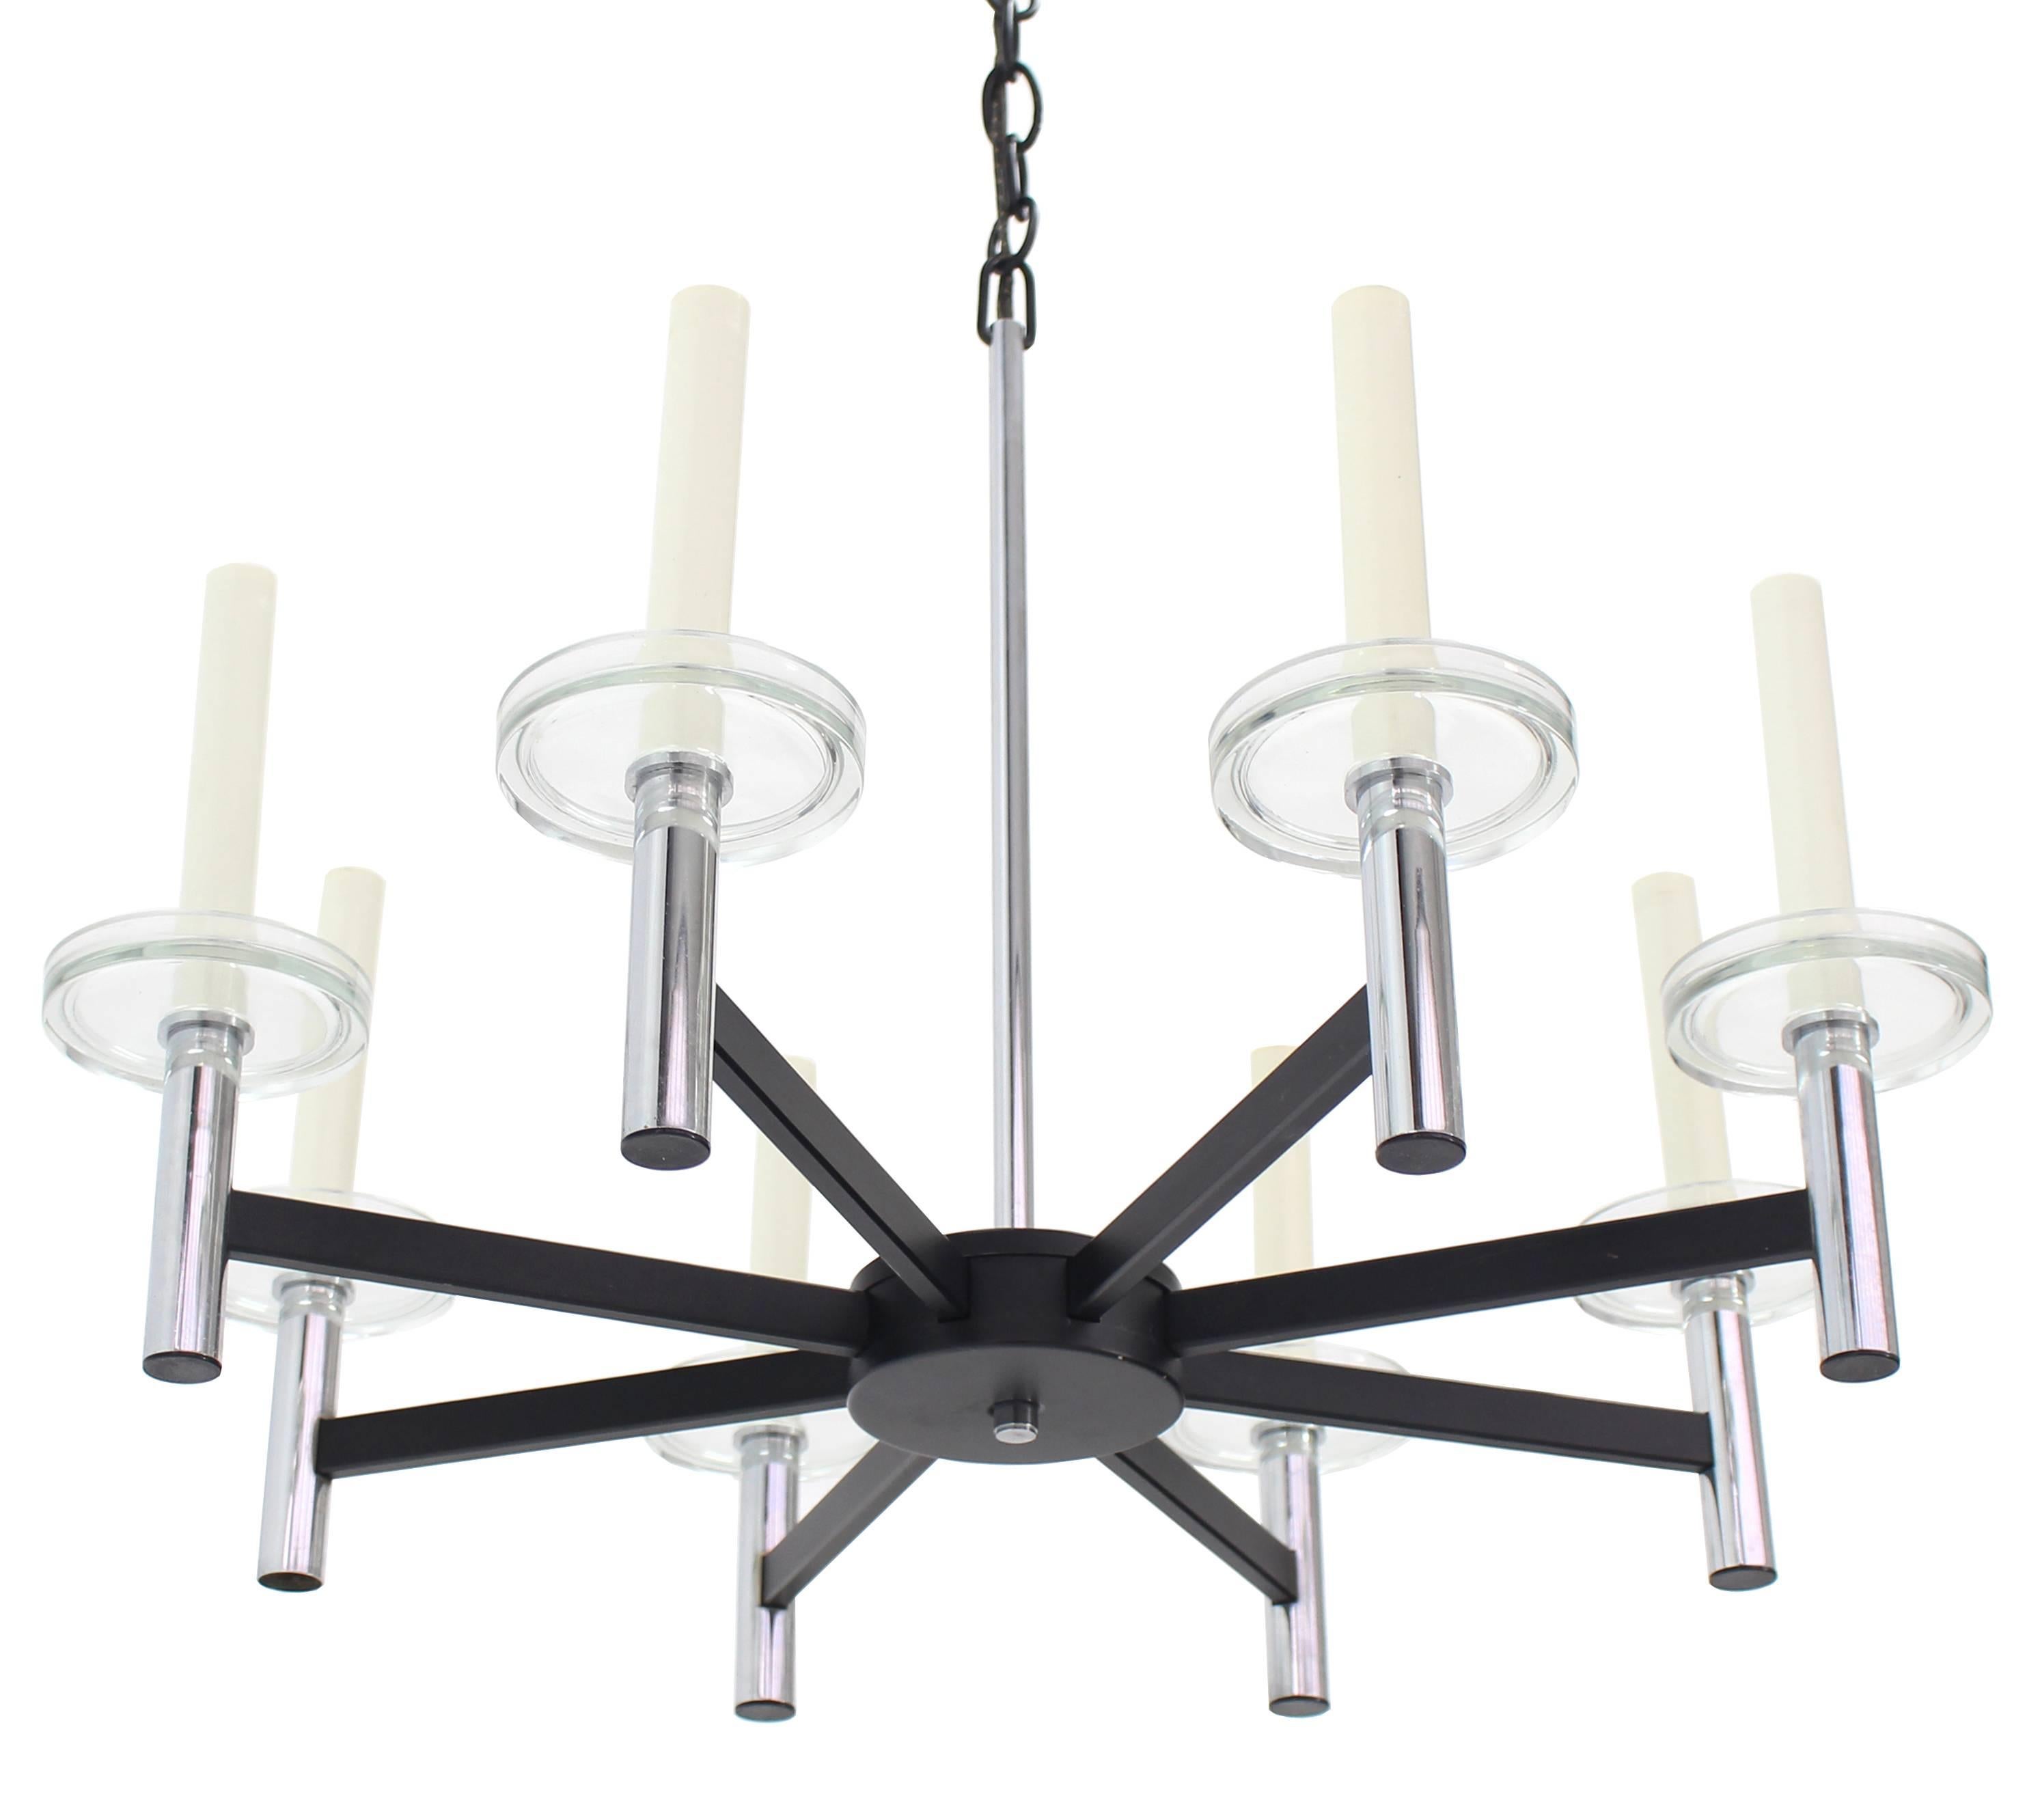 Chrome and Glass Light Fixture In Excellent Condition For Sale In Rockaway, NJ